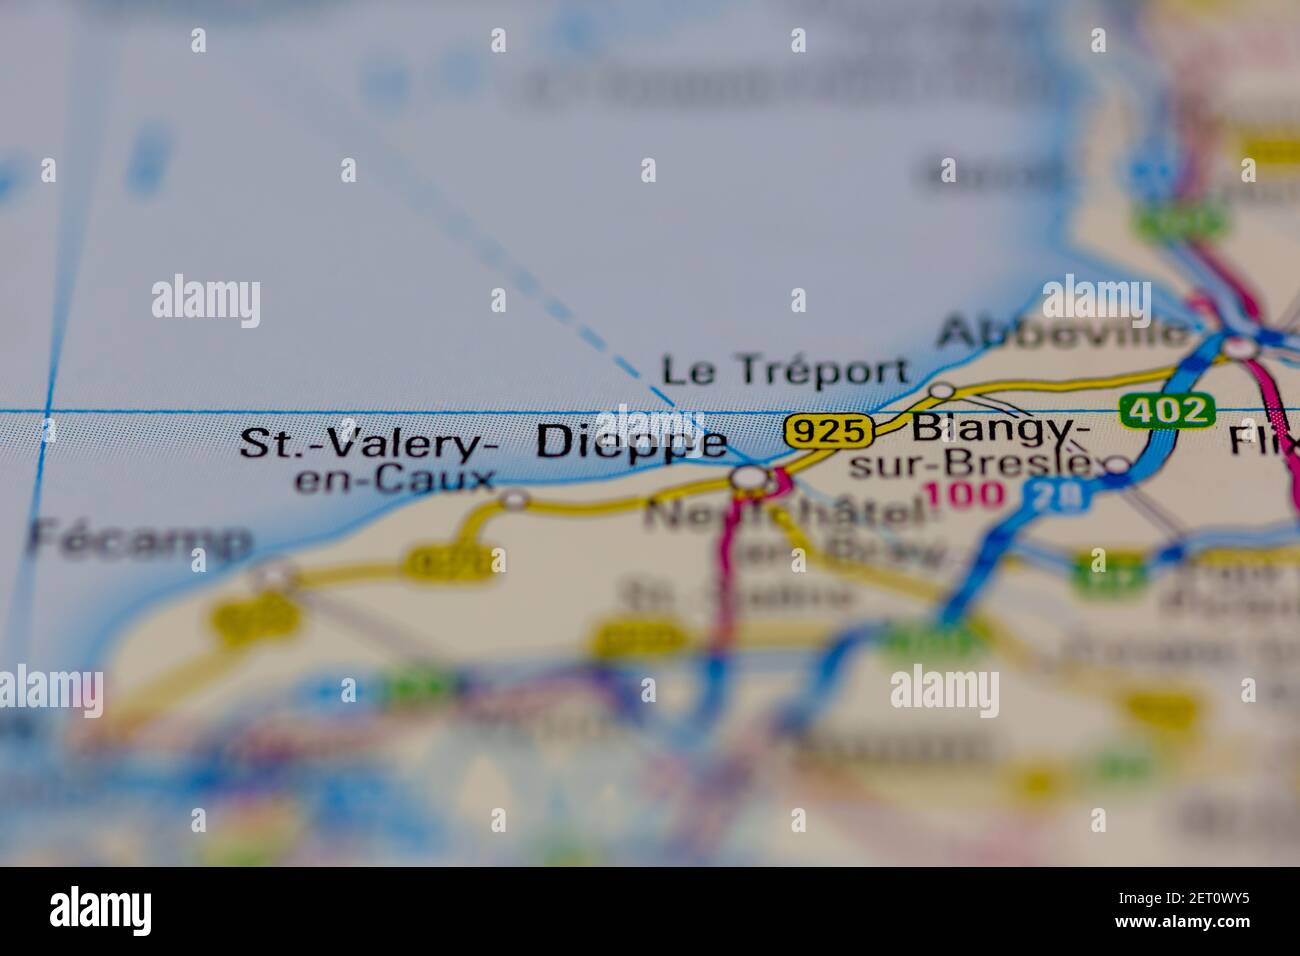 Dieppe Shown on a road map or Geography map Stock Photo